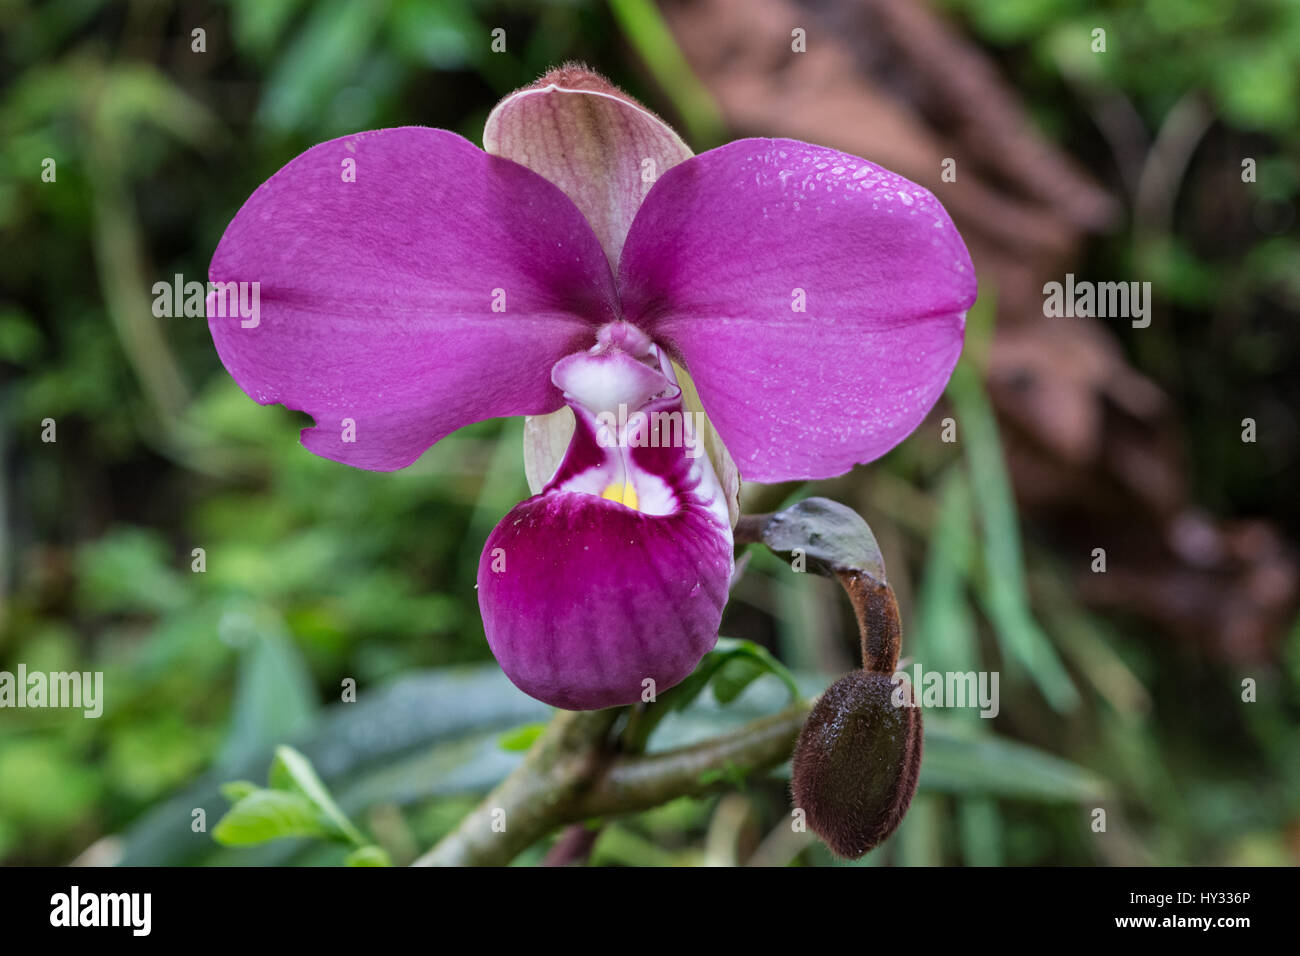 Phragmipedium kovachii, a beautiful Lady's Slipper orchid, only grows in the cloud forest of Northern Peru. Stock Photo